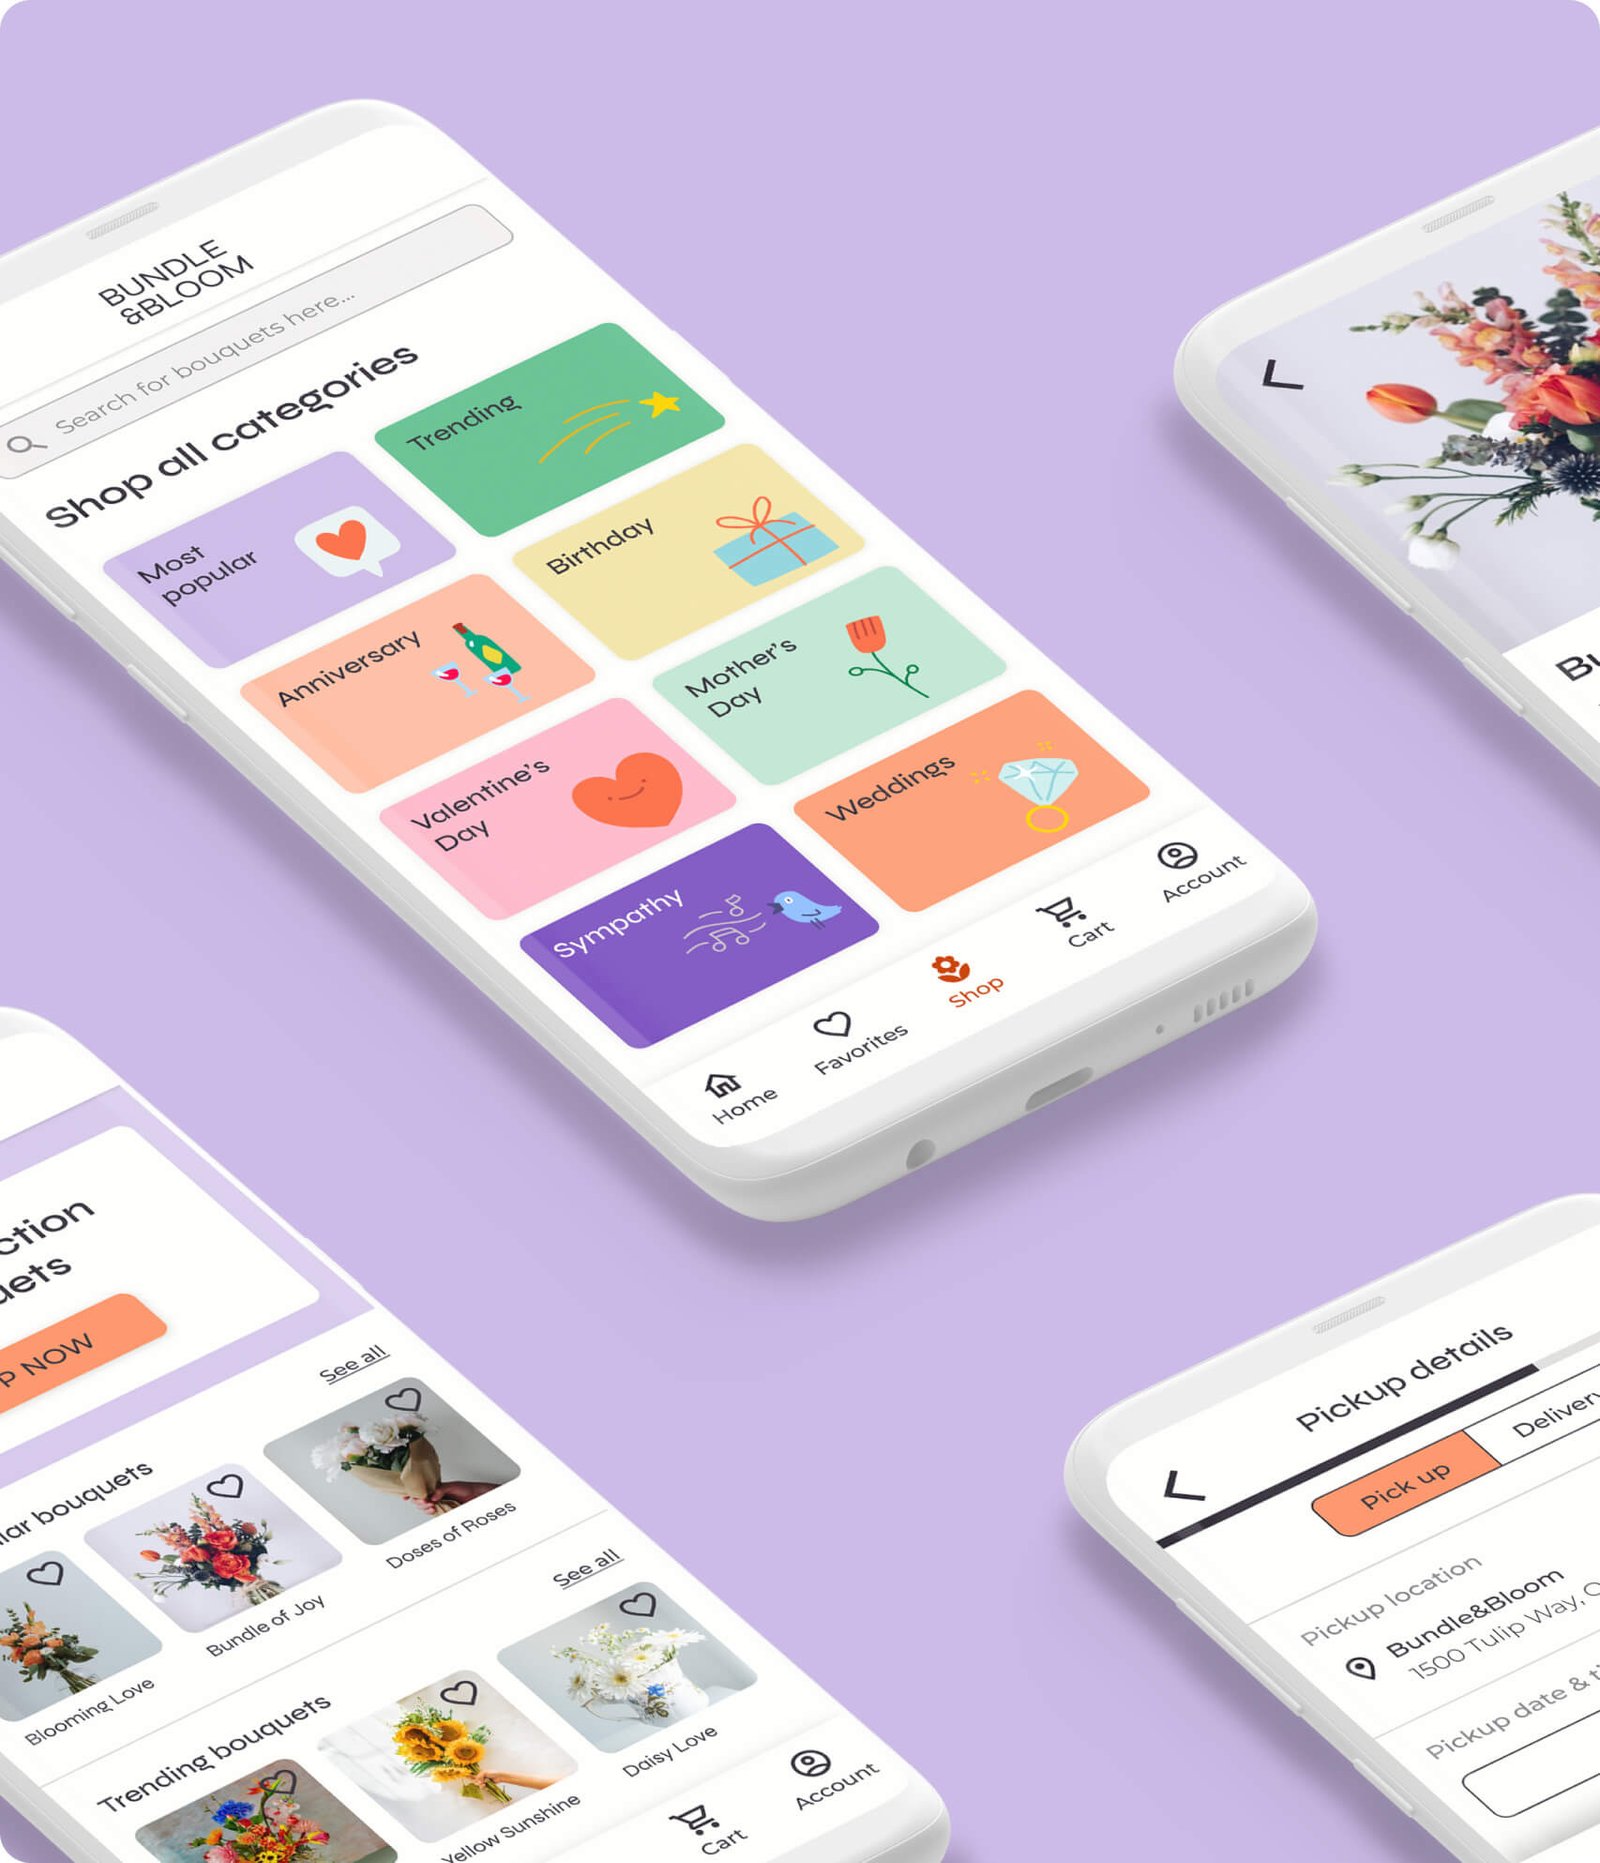 Bumble and Bloom is a flower bouquet ordering app that allows users to easily choose and order flower bouquets